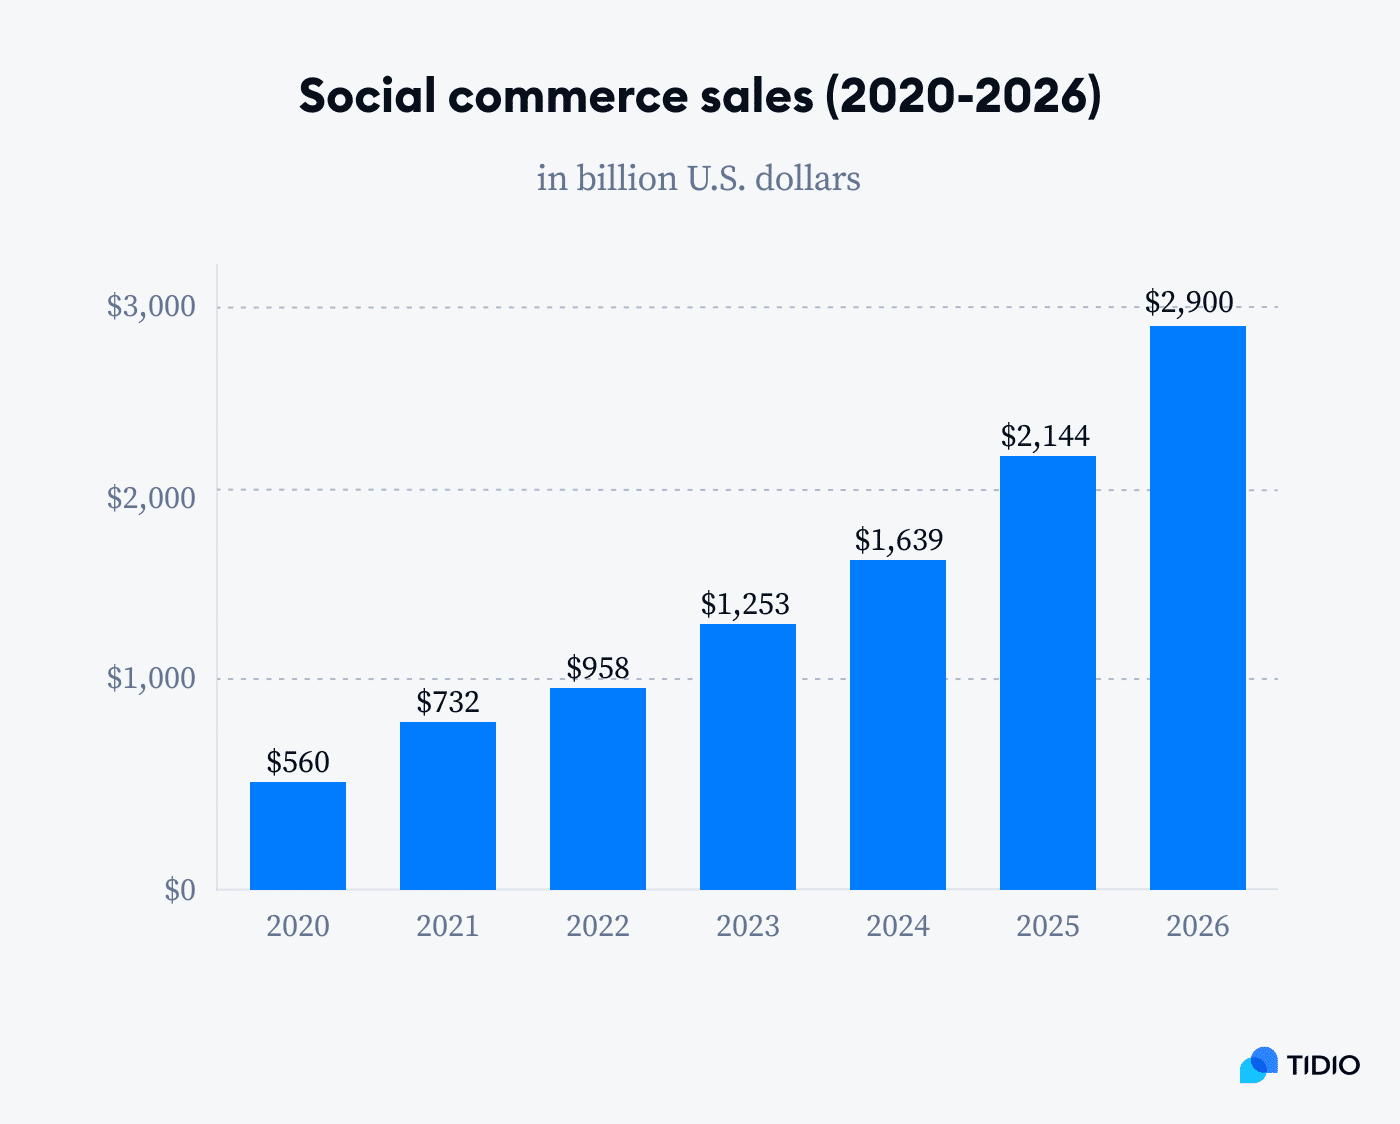 The social commerce market size will reach almost $1.3 trillion in 2023